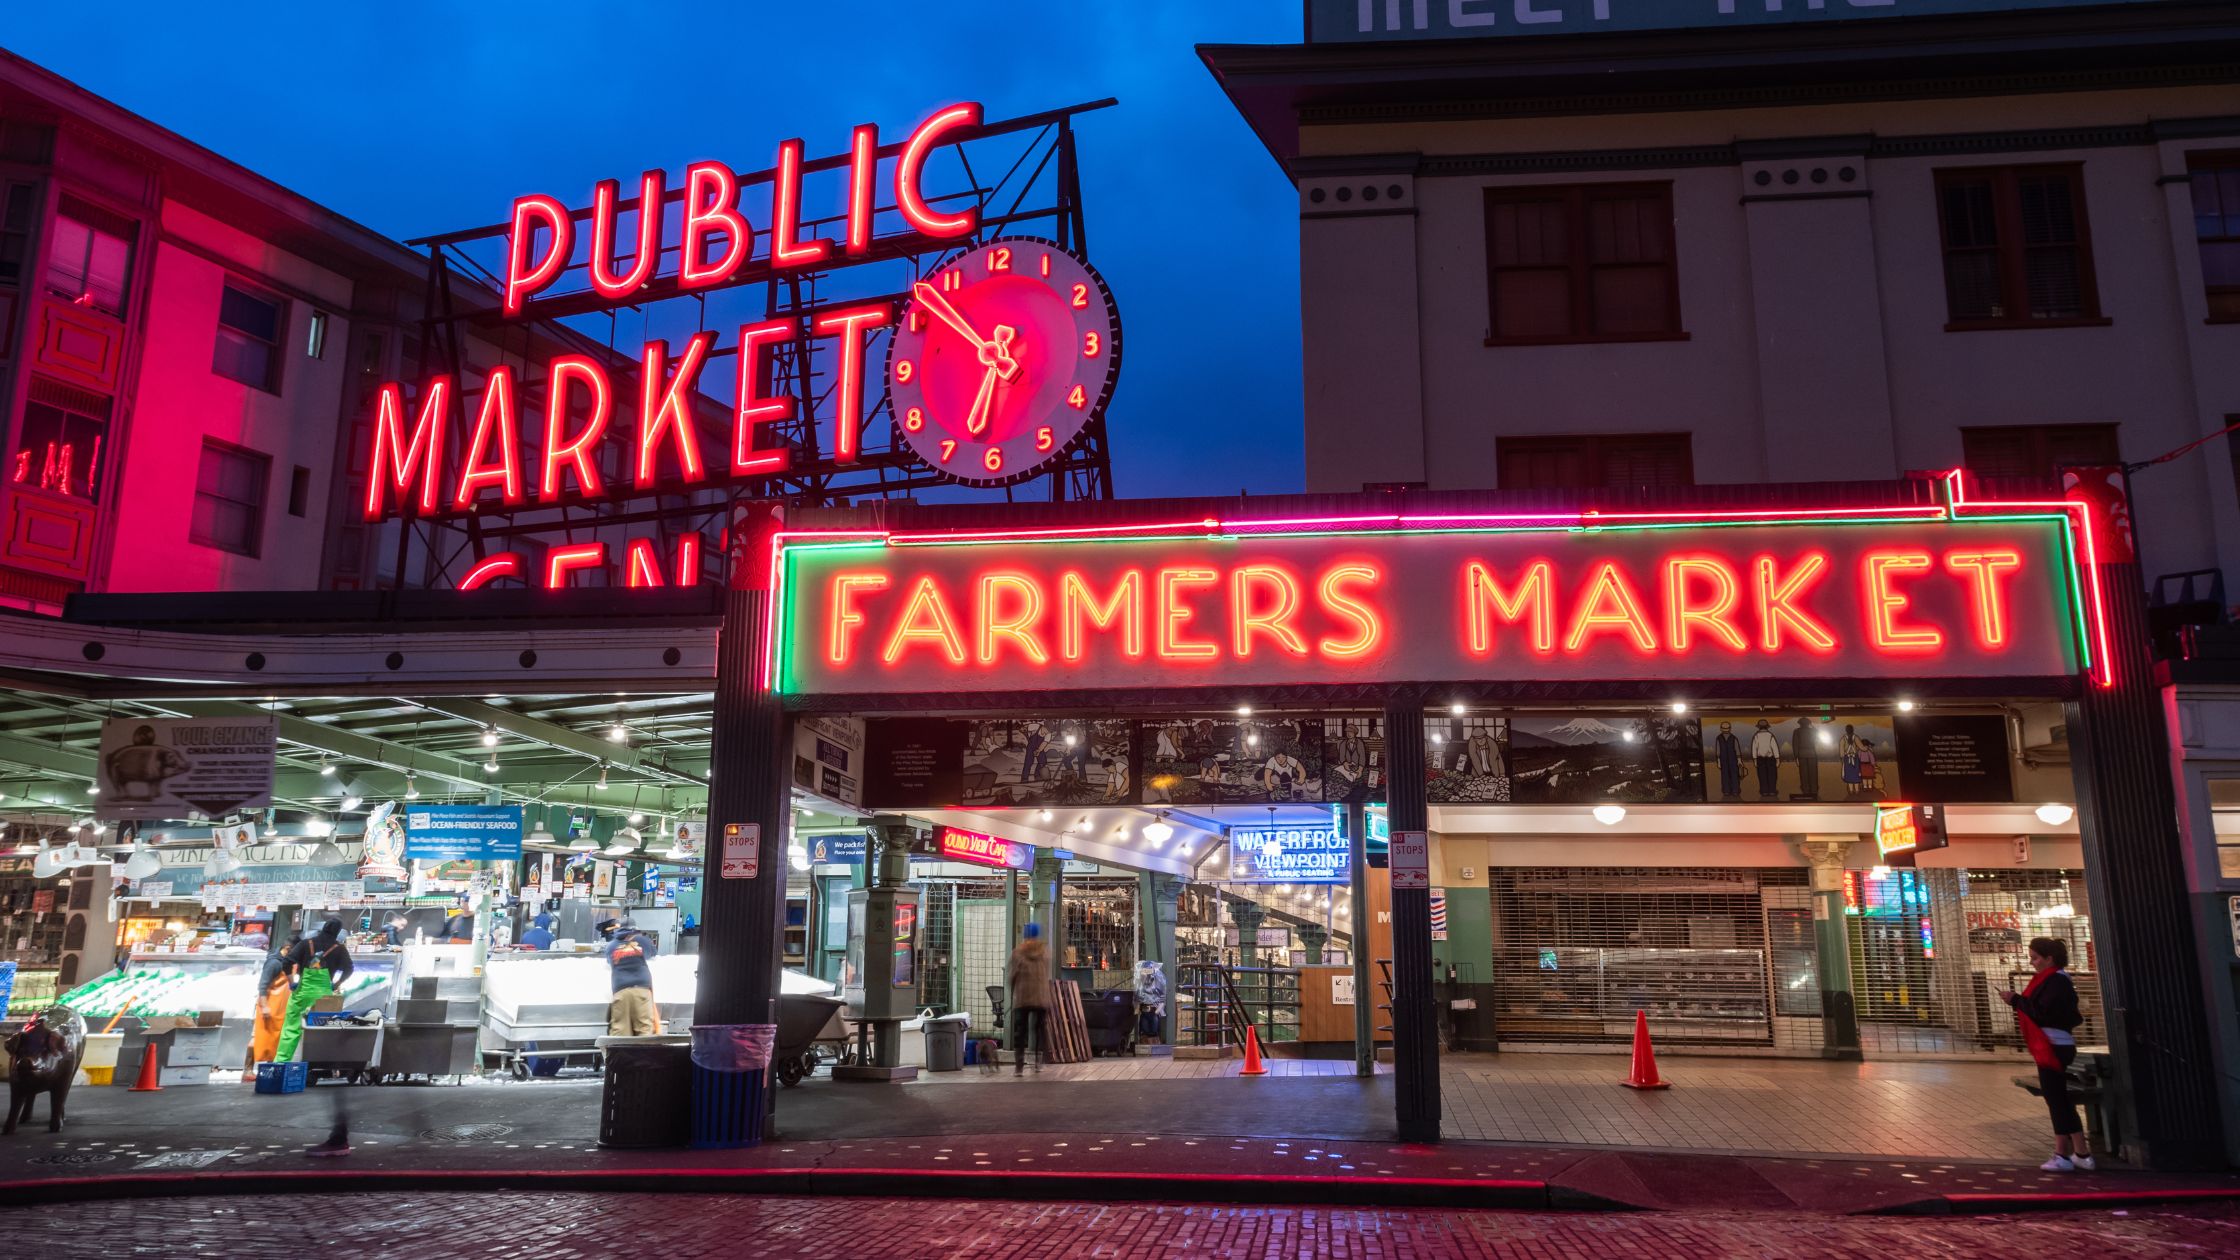 How to See Fish Get Thrown At Pike Place Fish Market